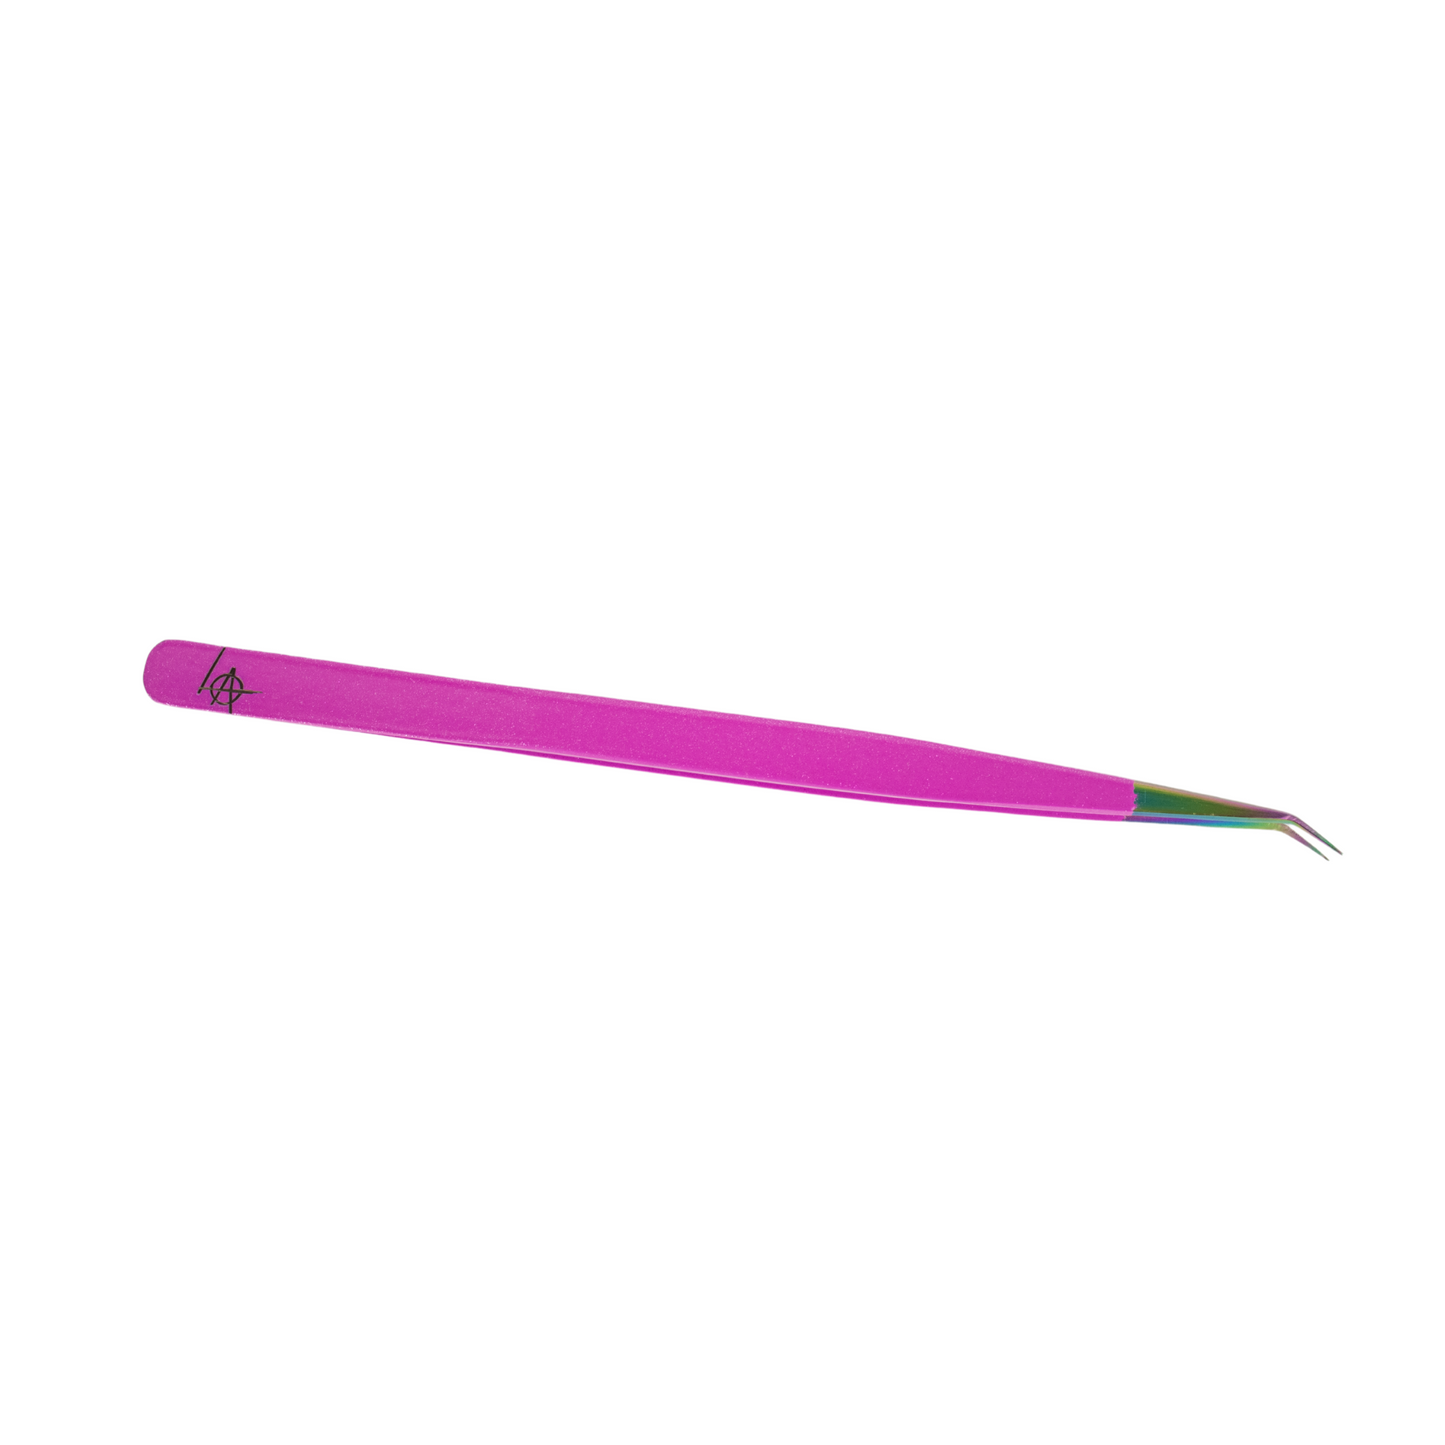 Curved Isolation Tweezer Plastics Collection 'So Fetch'